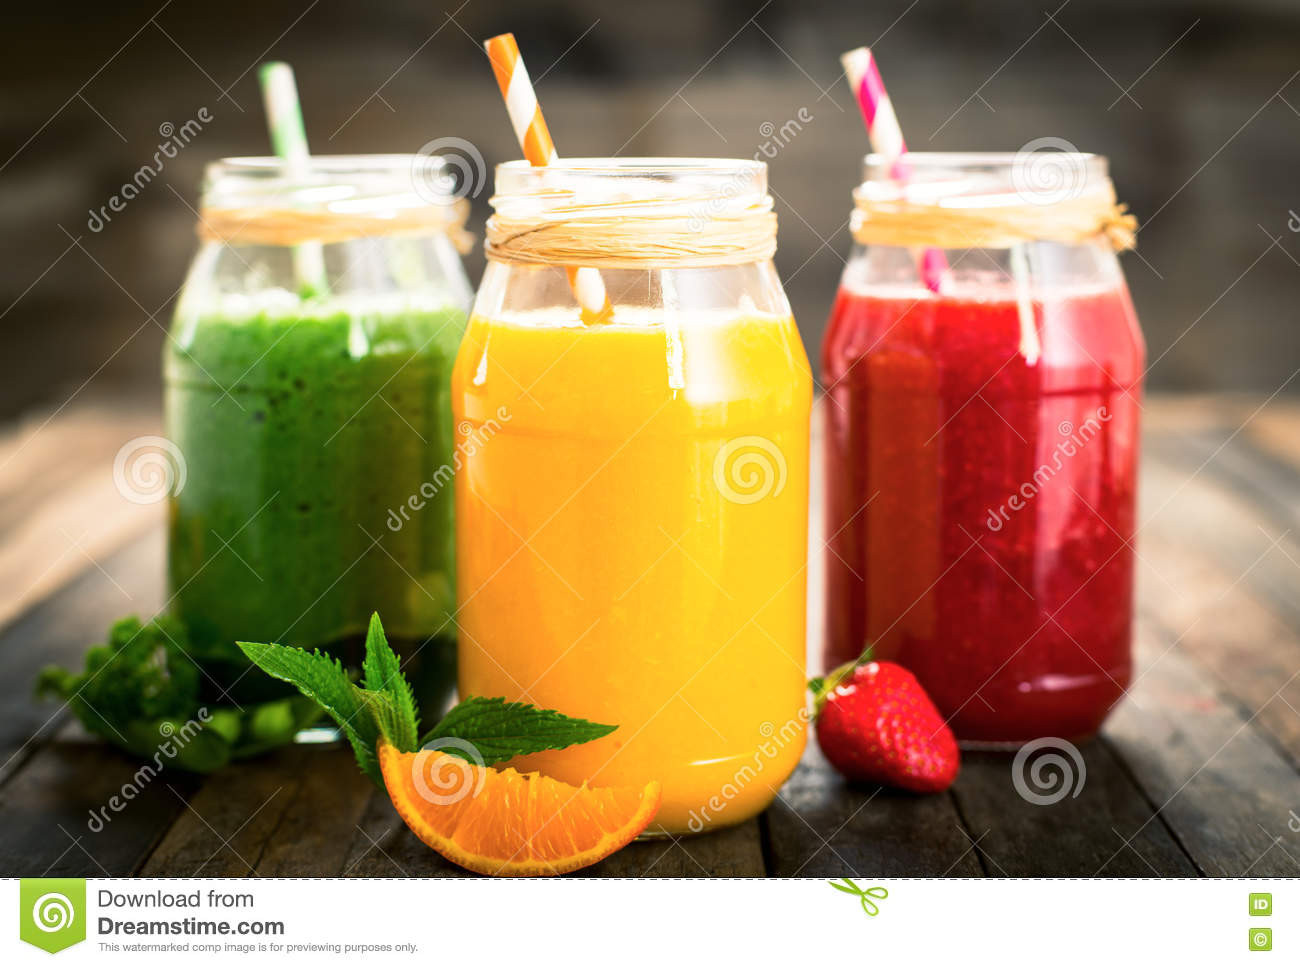 Healthy Fruit And Vegetable Smoothies
 Healthy Fruit And Ve able Smoothies Stock Image